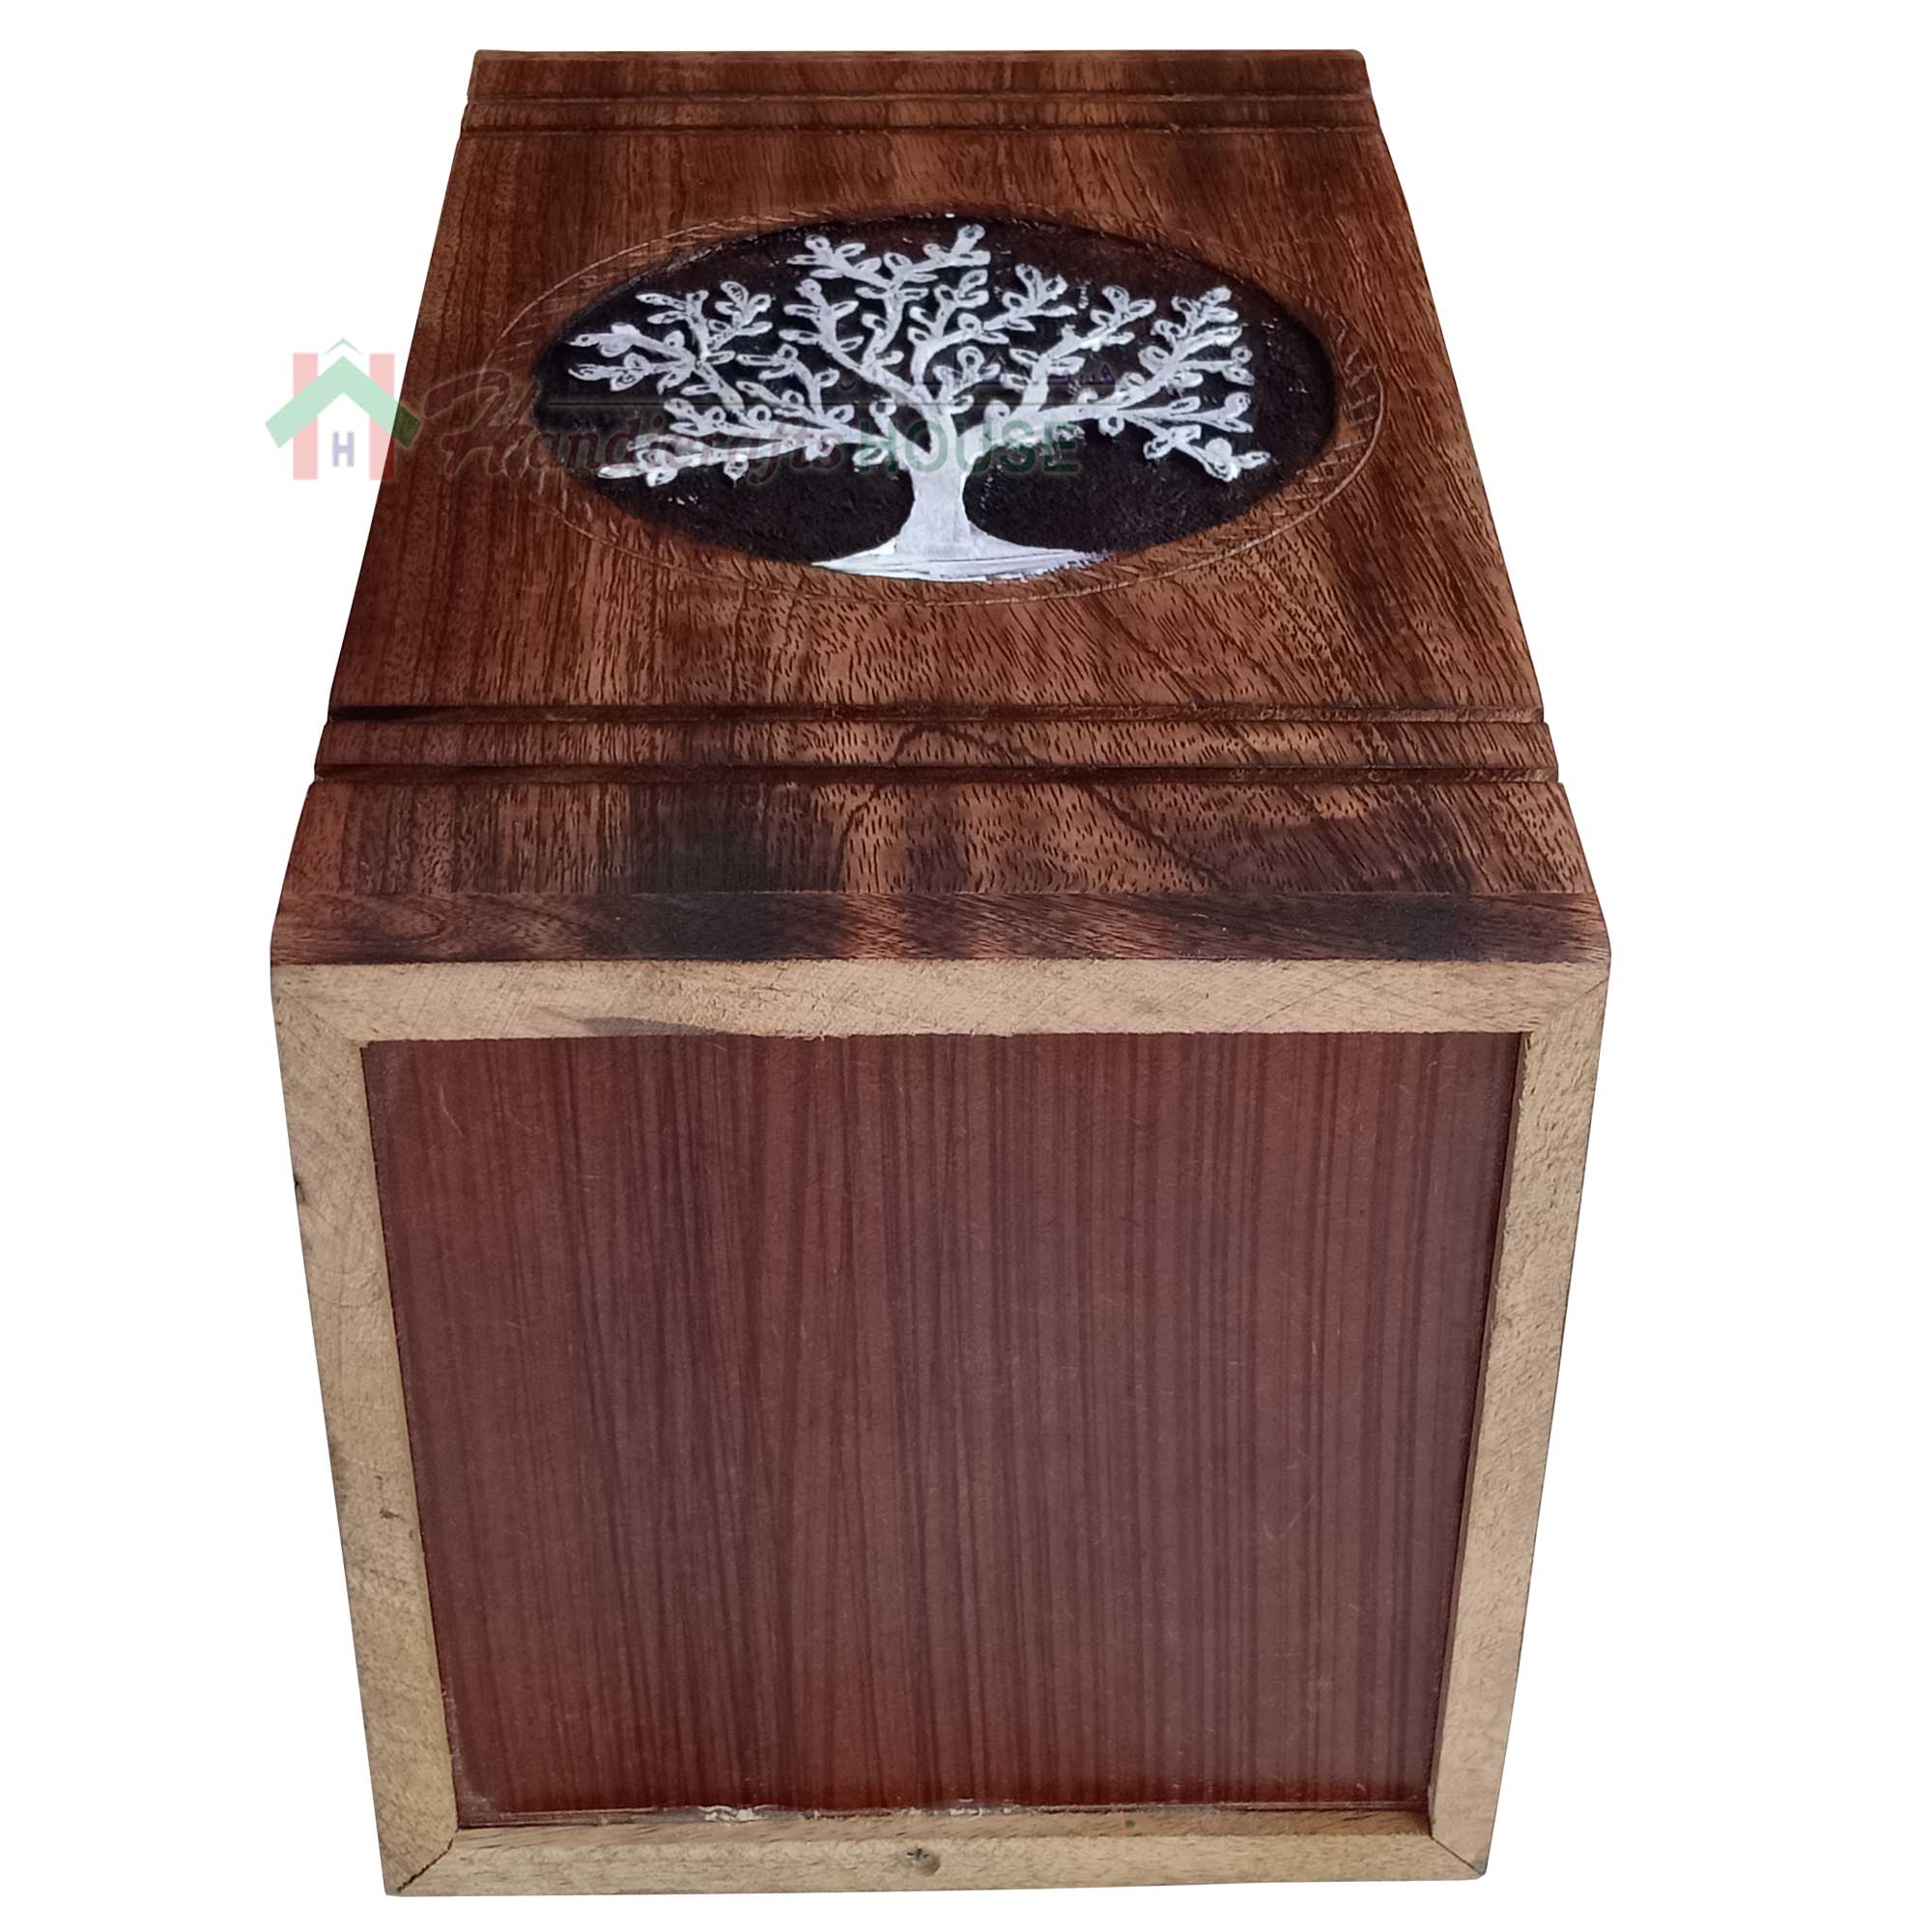 Set of 4 Dark Brown Sheesham Wood Pet Urns for Ashes Tree of Life Engraved Wooden Cremation Urns for Ashes Funeral Urns for Human Ashes Adult Pet Urns for Dogs,Wooden Box